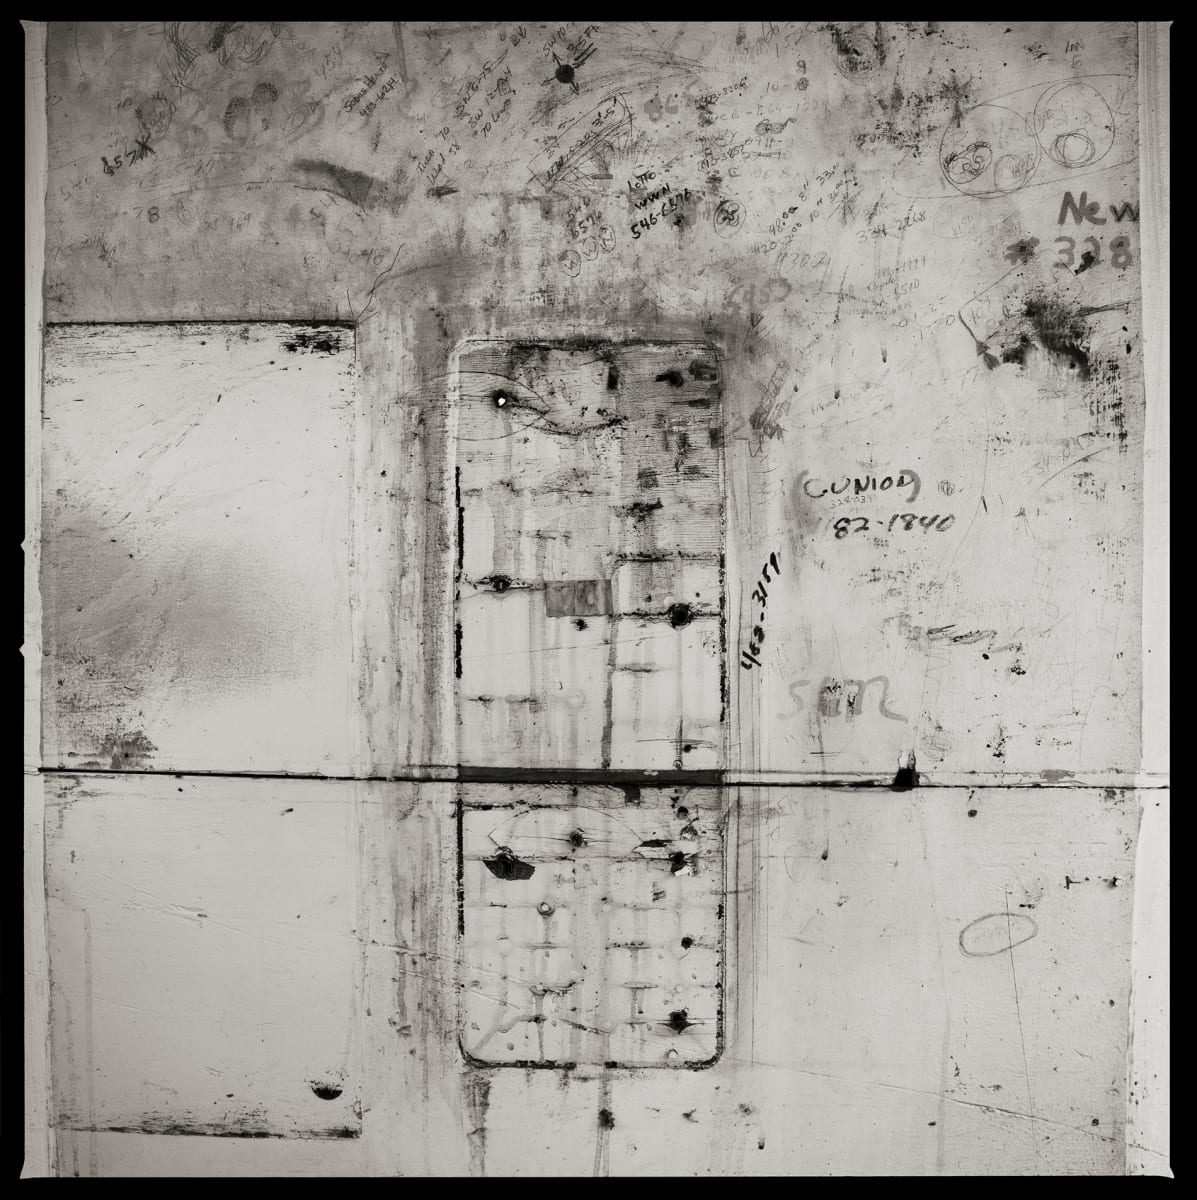 585.325.9301 – Genesee Brewery, 445 Saint Paul Street, Building #6, Rochester, NY 14605 by Eric T. Kunsman  Image: ID: A black and white image shows an empty cement wall that is cracked and has a rectangular outline where a payphone used to be mounted.  There are holes around the inside of the rectangle were there were screws.